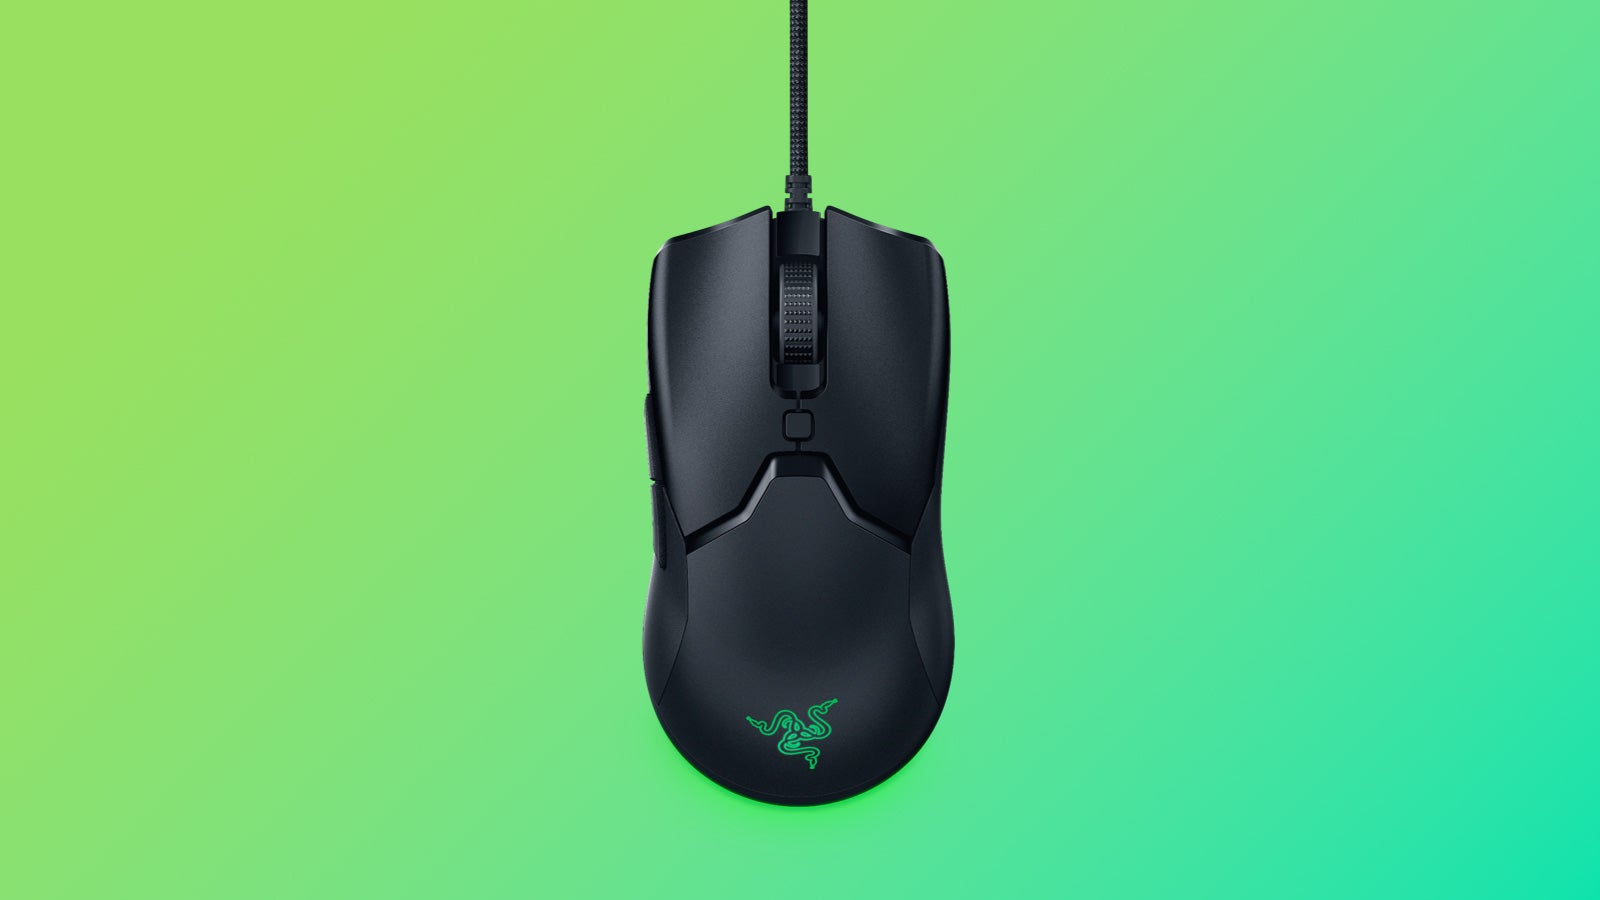 a photo of a razer viper mini gaming mouse, with a green Razer logo, on a coloured background. The mouse is symmetric, making it useful for left and right-handers.